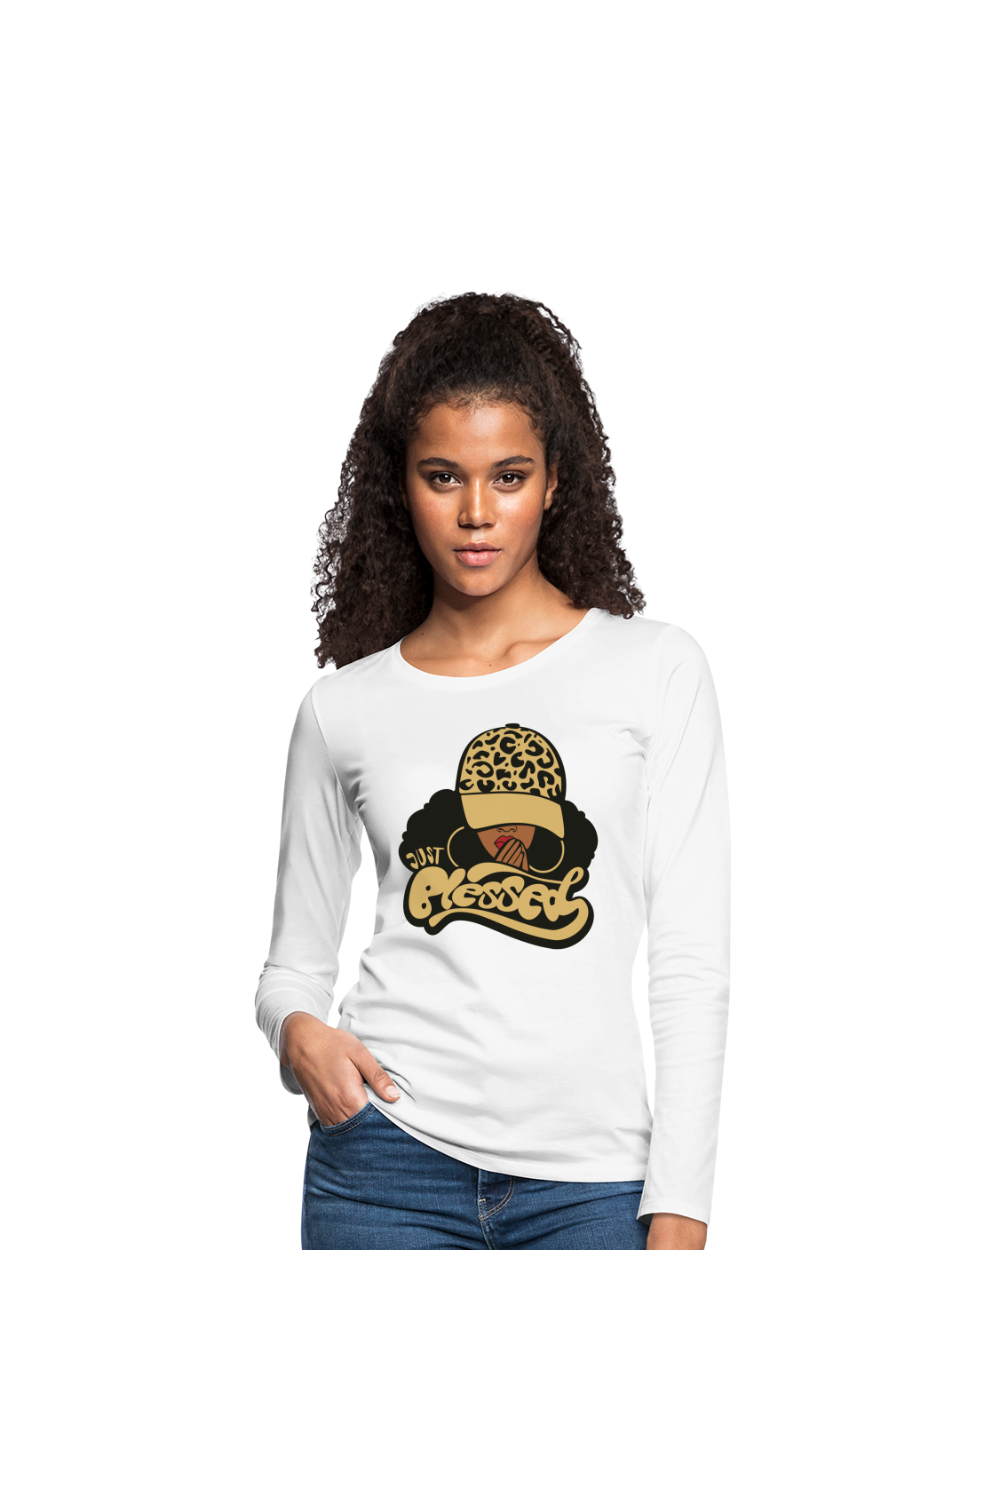 Women's Gold Just Blessed  Long Sleeve T-Shirt - white